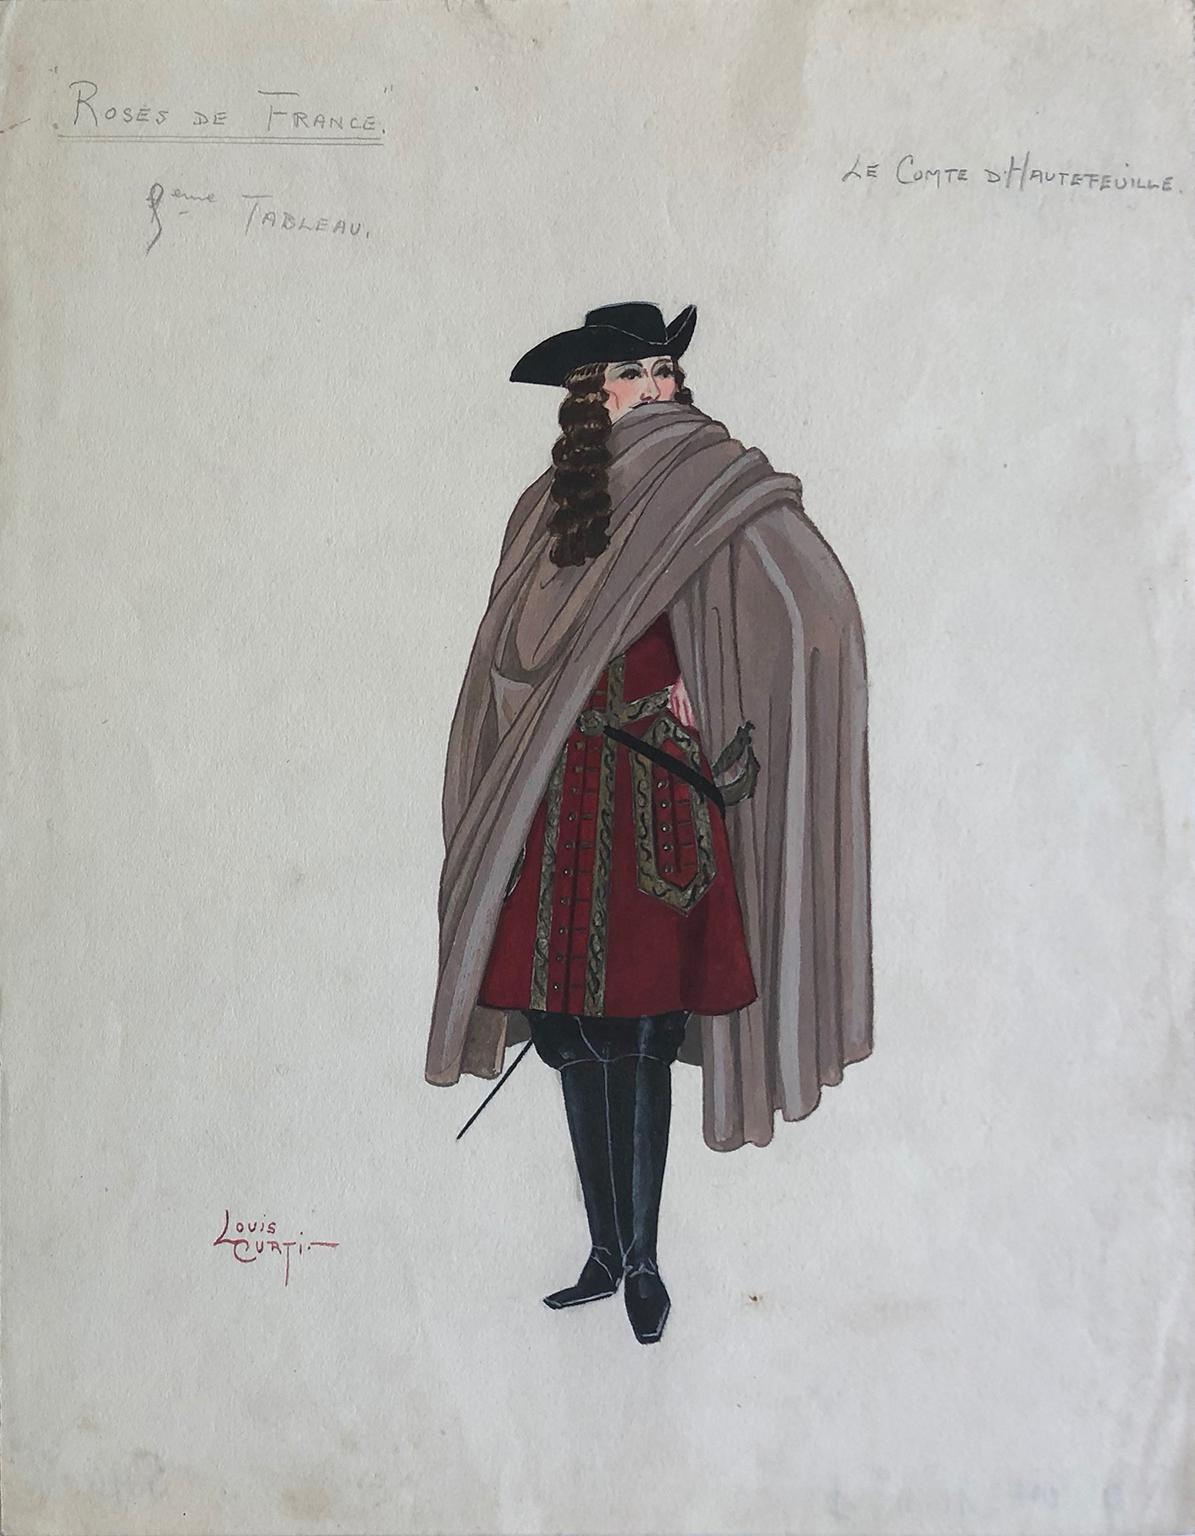 Louis Curti Opera Costume Design c 1933 "Le Comte D Hautefeuille"
A well executed watercolour and gouache on paper. Signed lower left as well as being titled in pencil with other inscriptions verso to the image.

Louis Curti (born in England, active